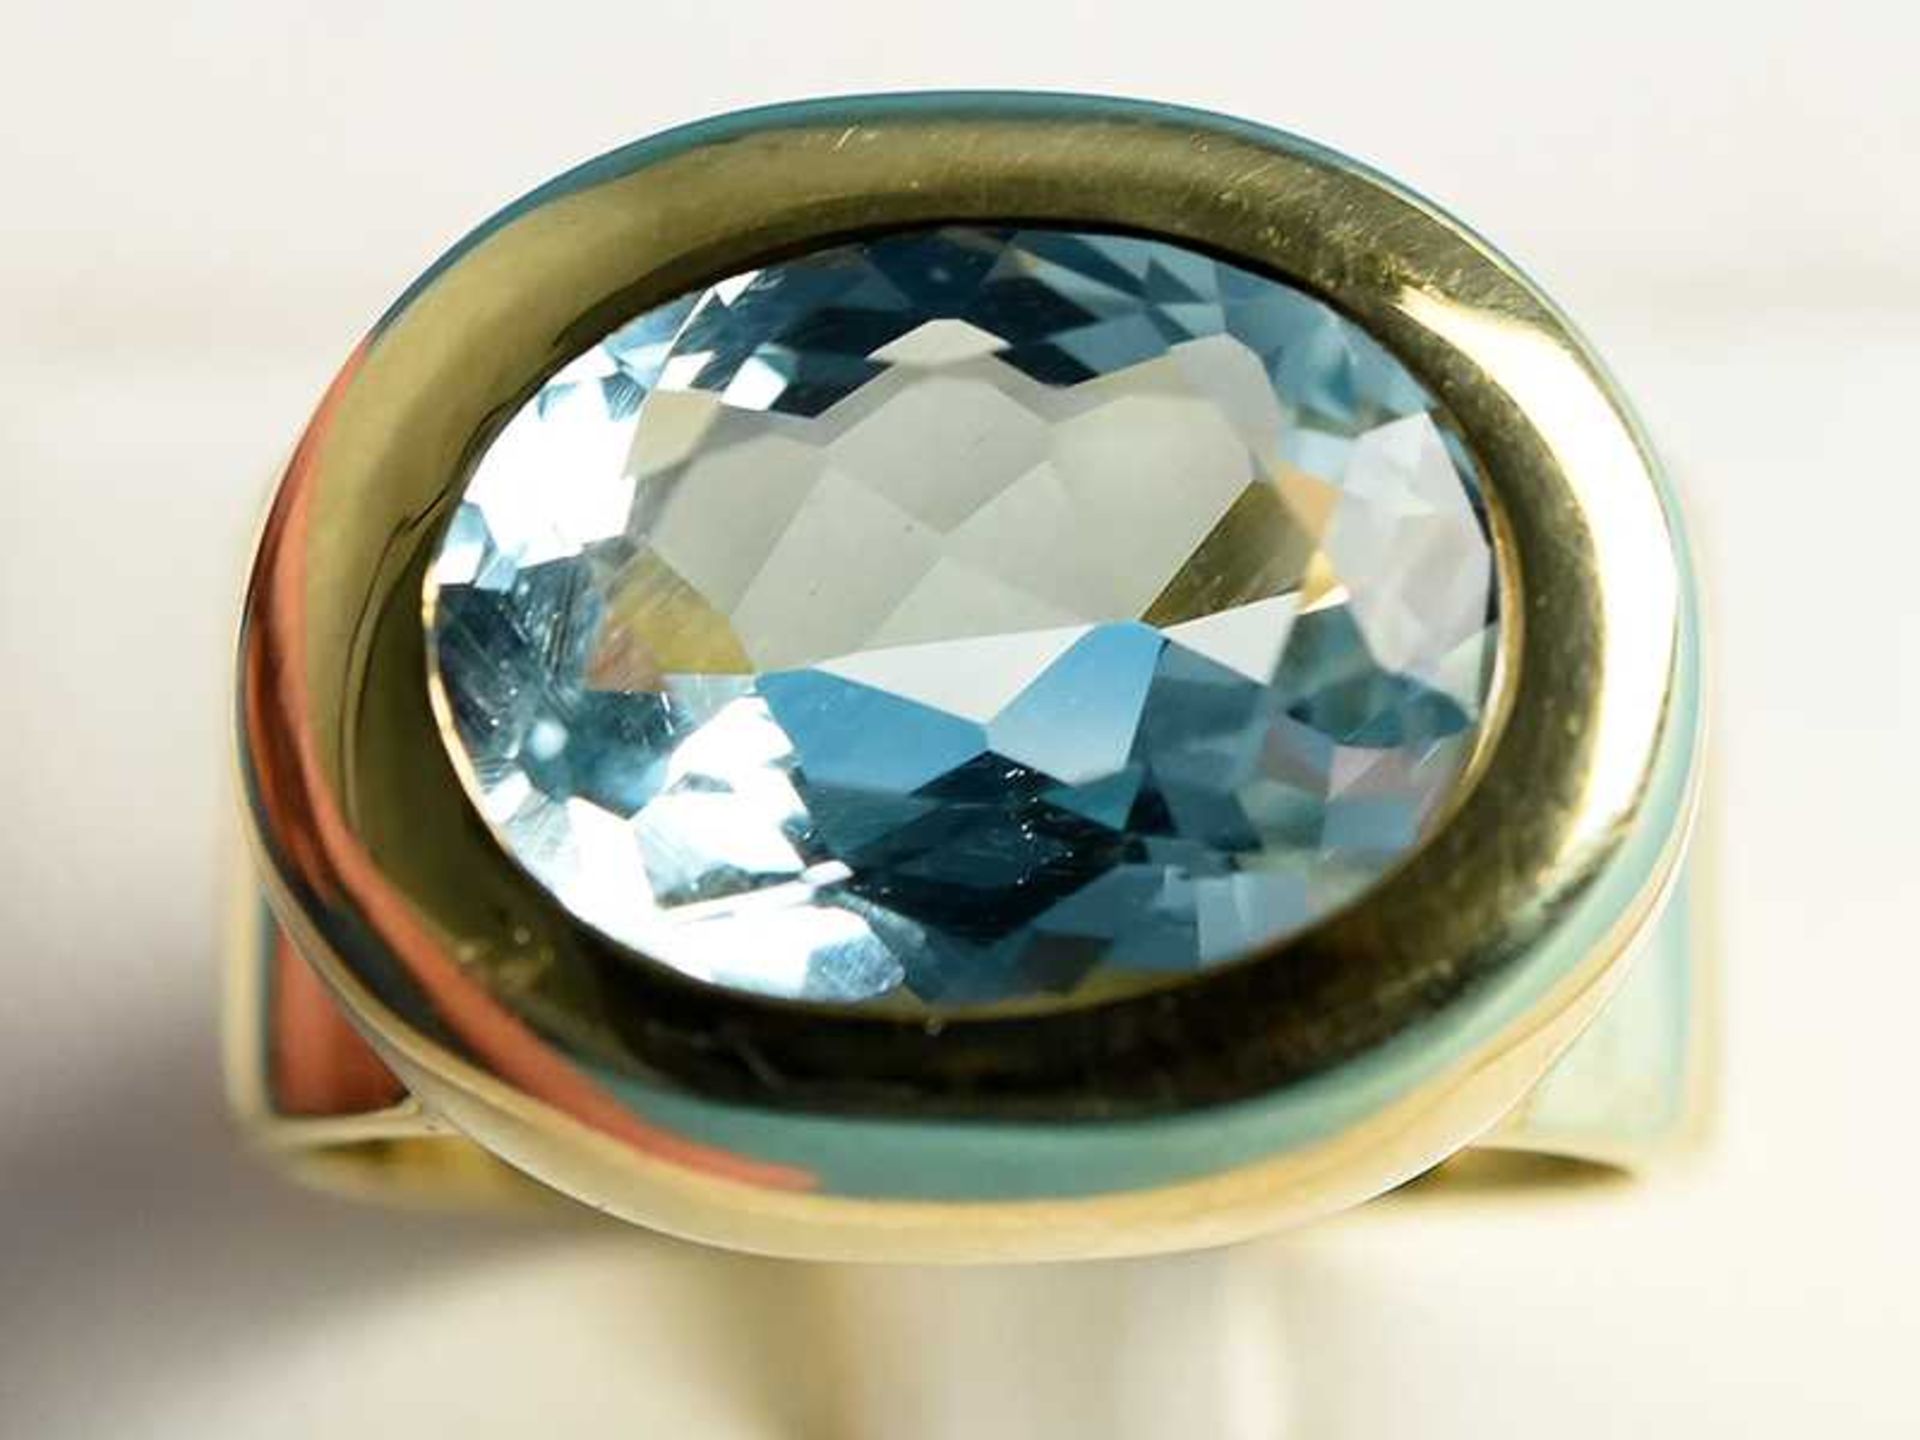 Massiver Bandring mit Aquamarin ca. 5,8 ct, Goldschmiedearbeit, 20. Jh. 585/- Gelbgold. - Image 7 of 10